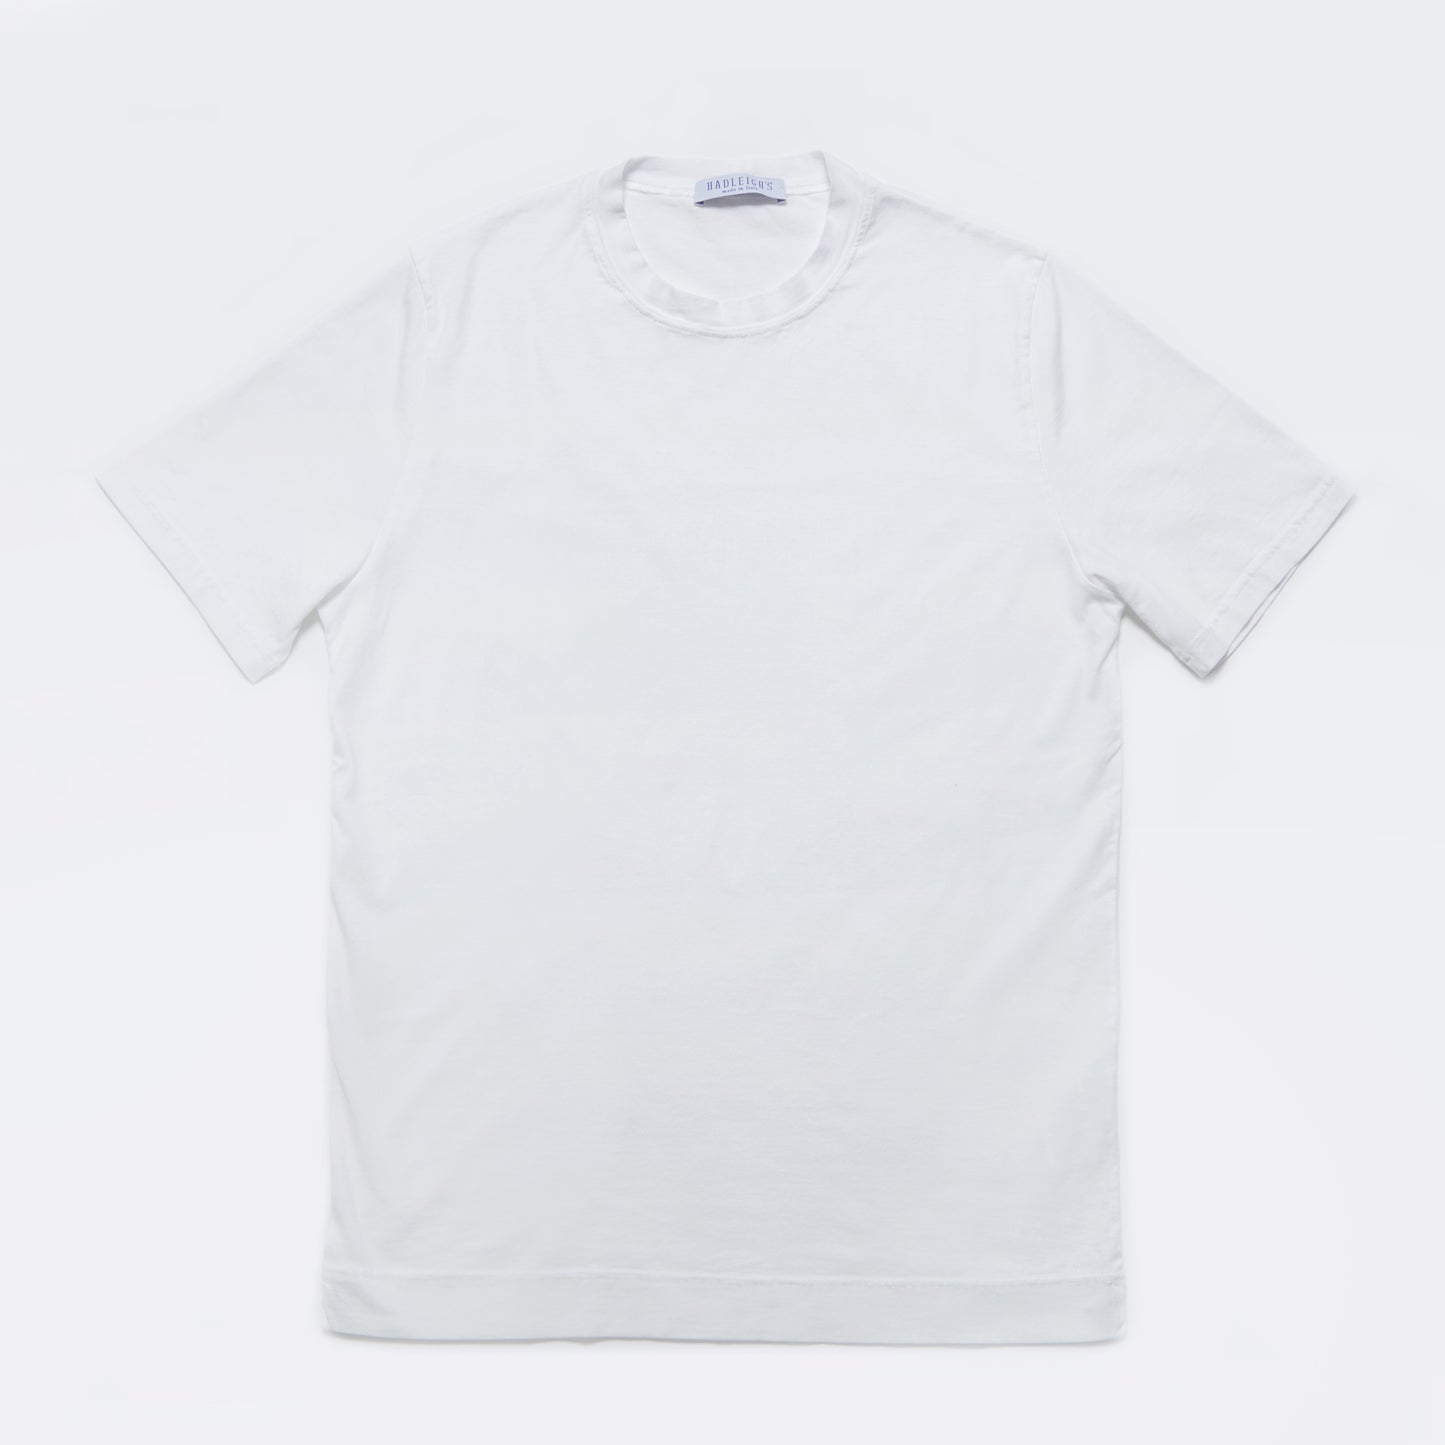 Extreme Jersey Tee in White